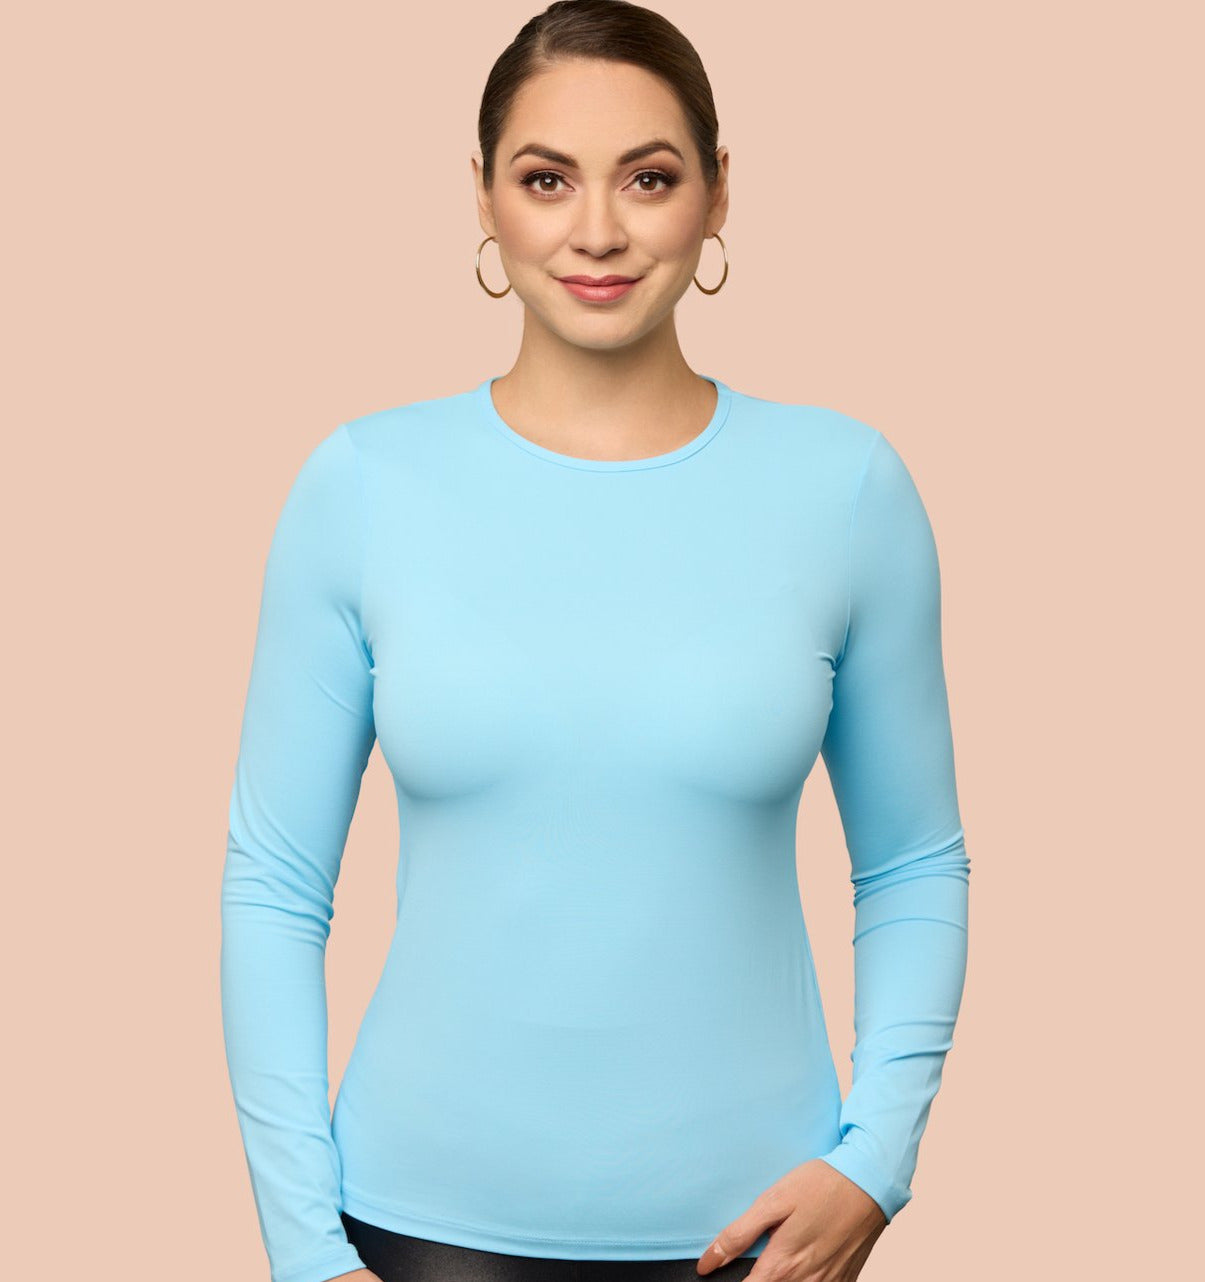 Long Sleeve Crew Neck Top Luxury Layering In Pretty Pink, Front View - Adea - Everyday Luxury